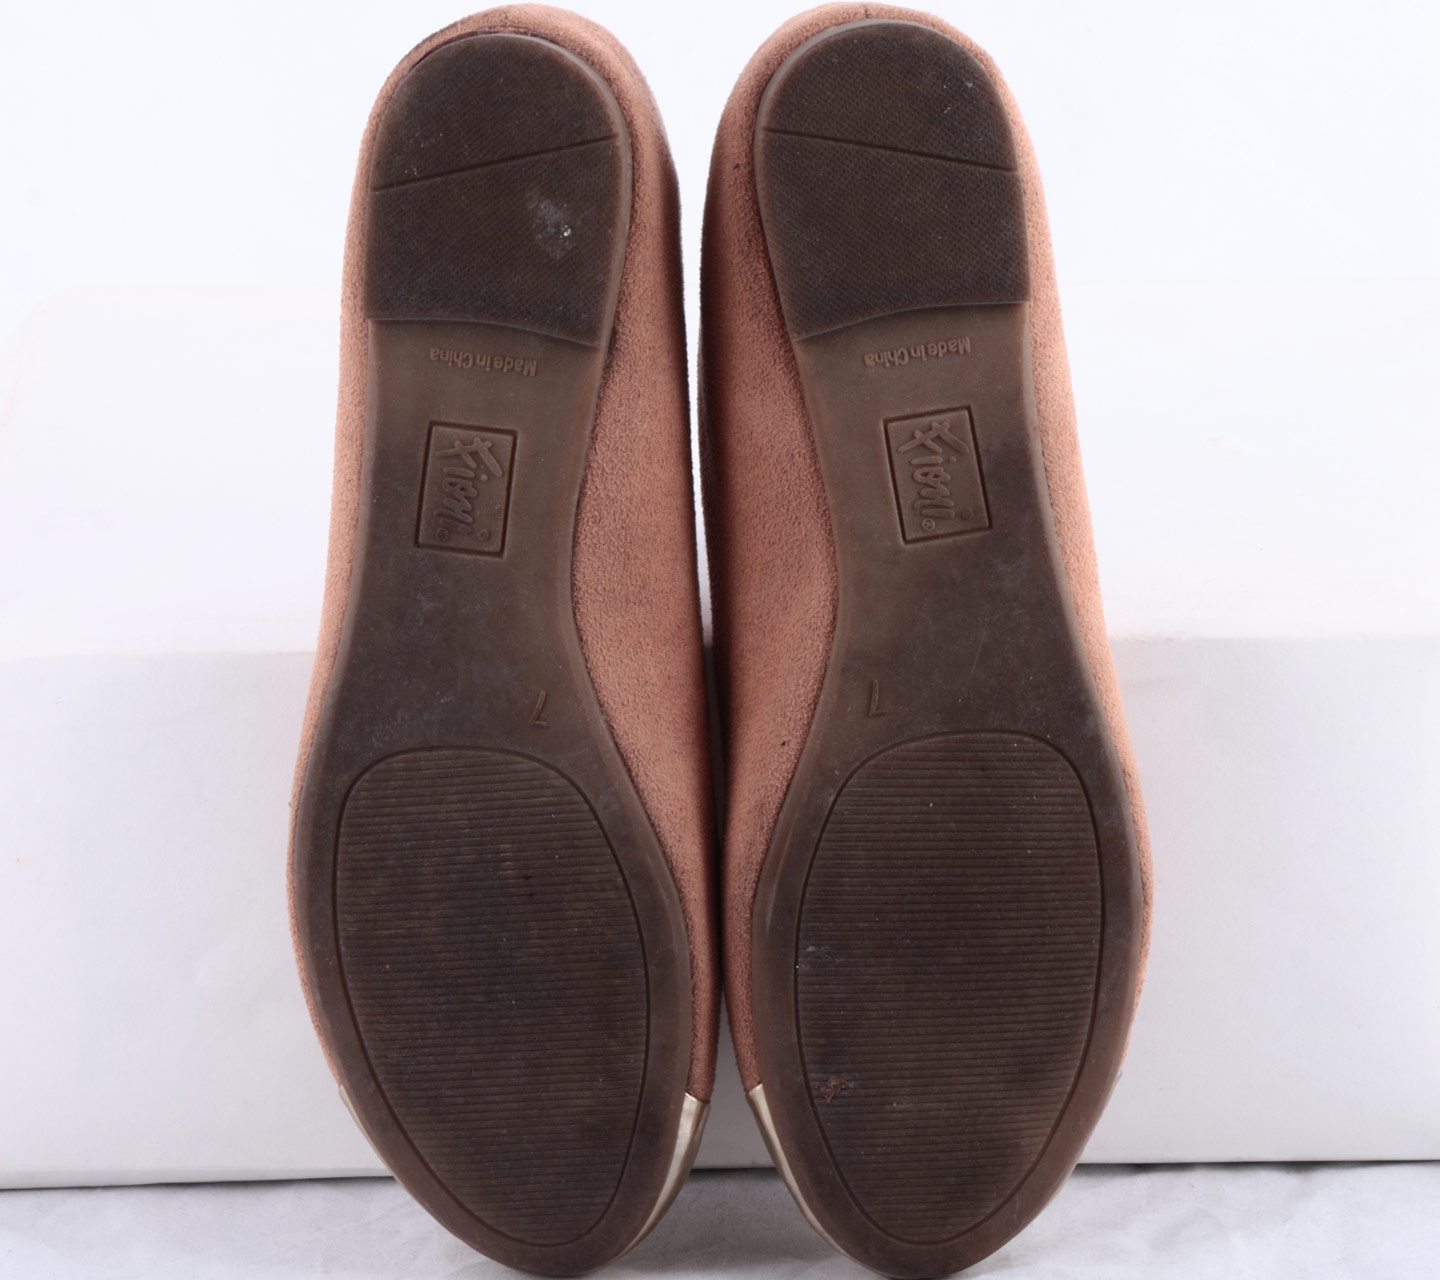 Fioni Brown And Gold Flats